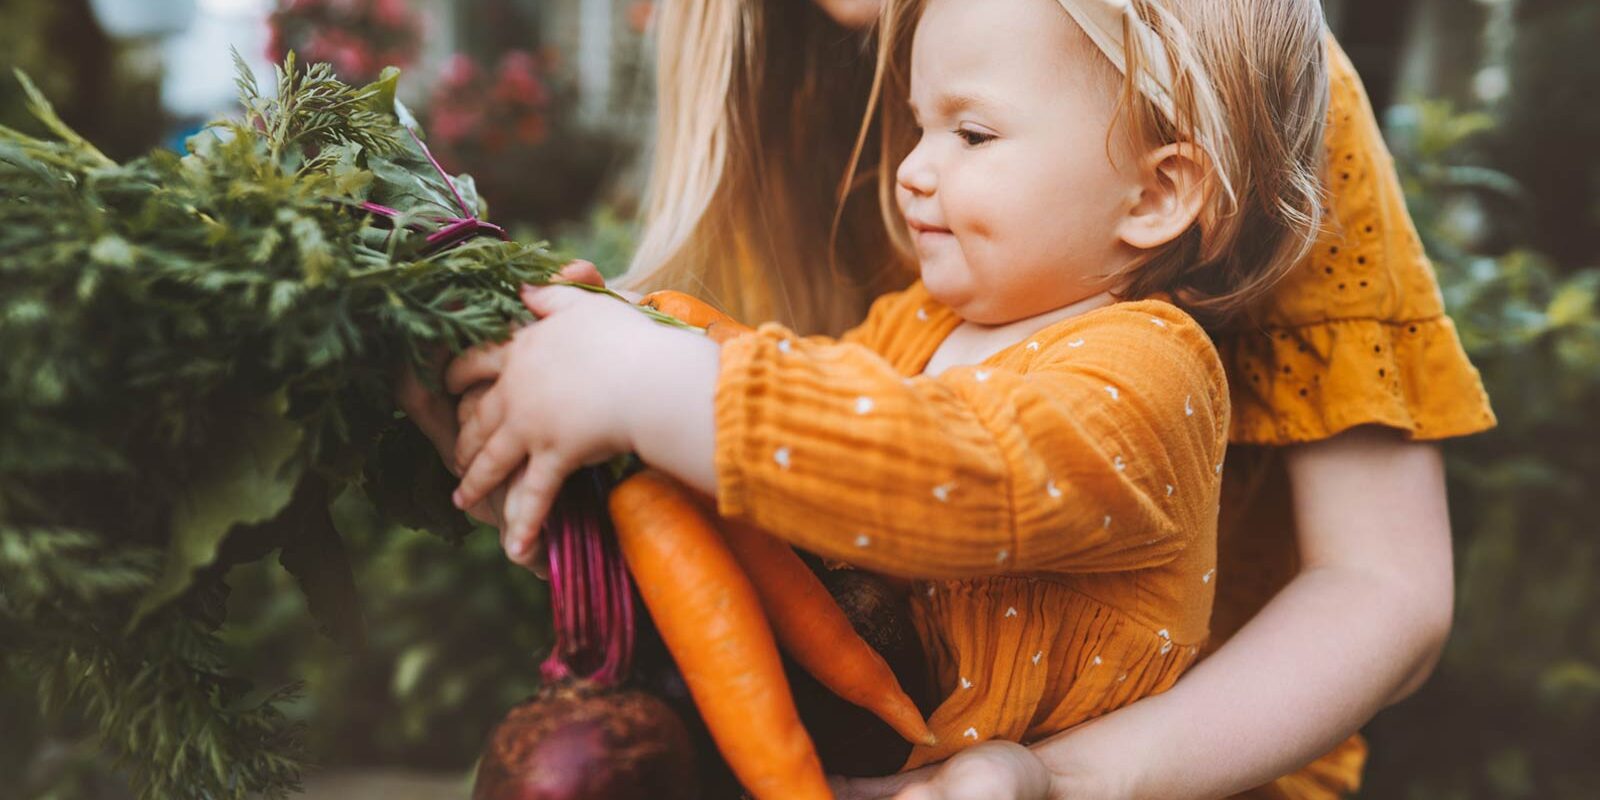 Toddler holding produce with parent